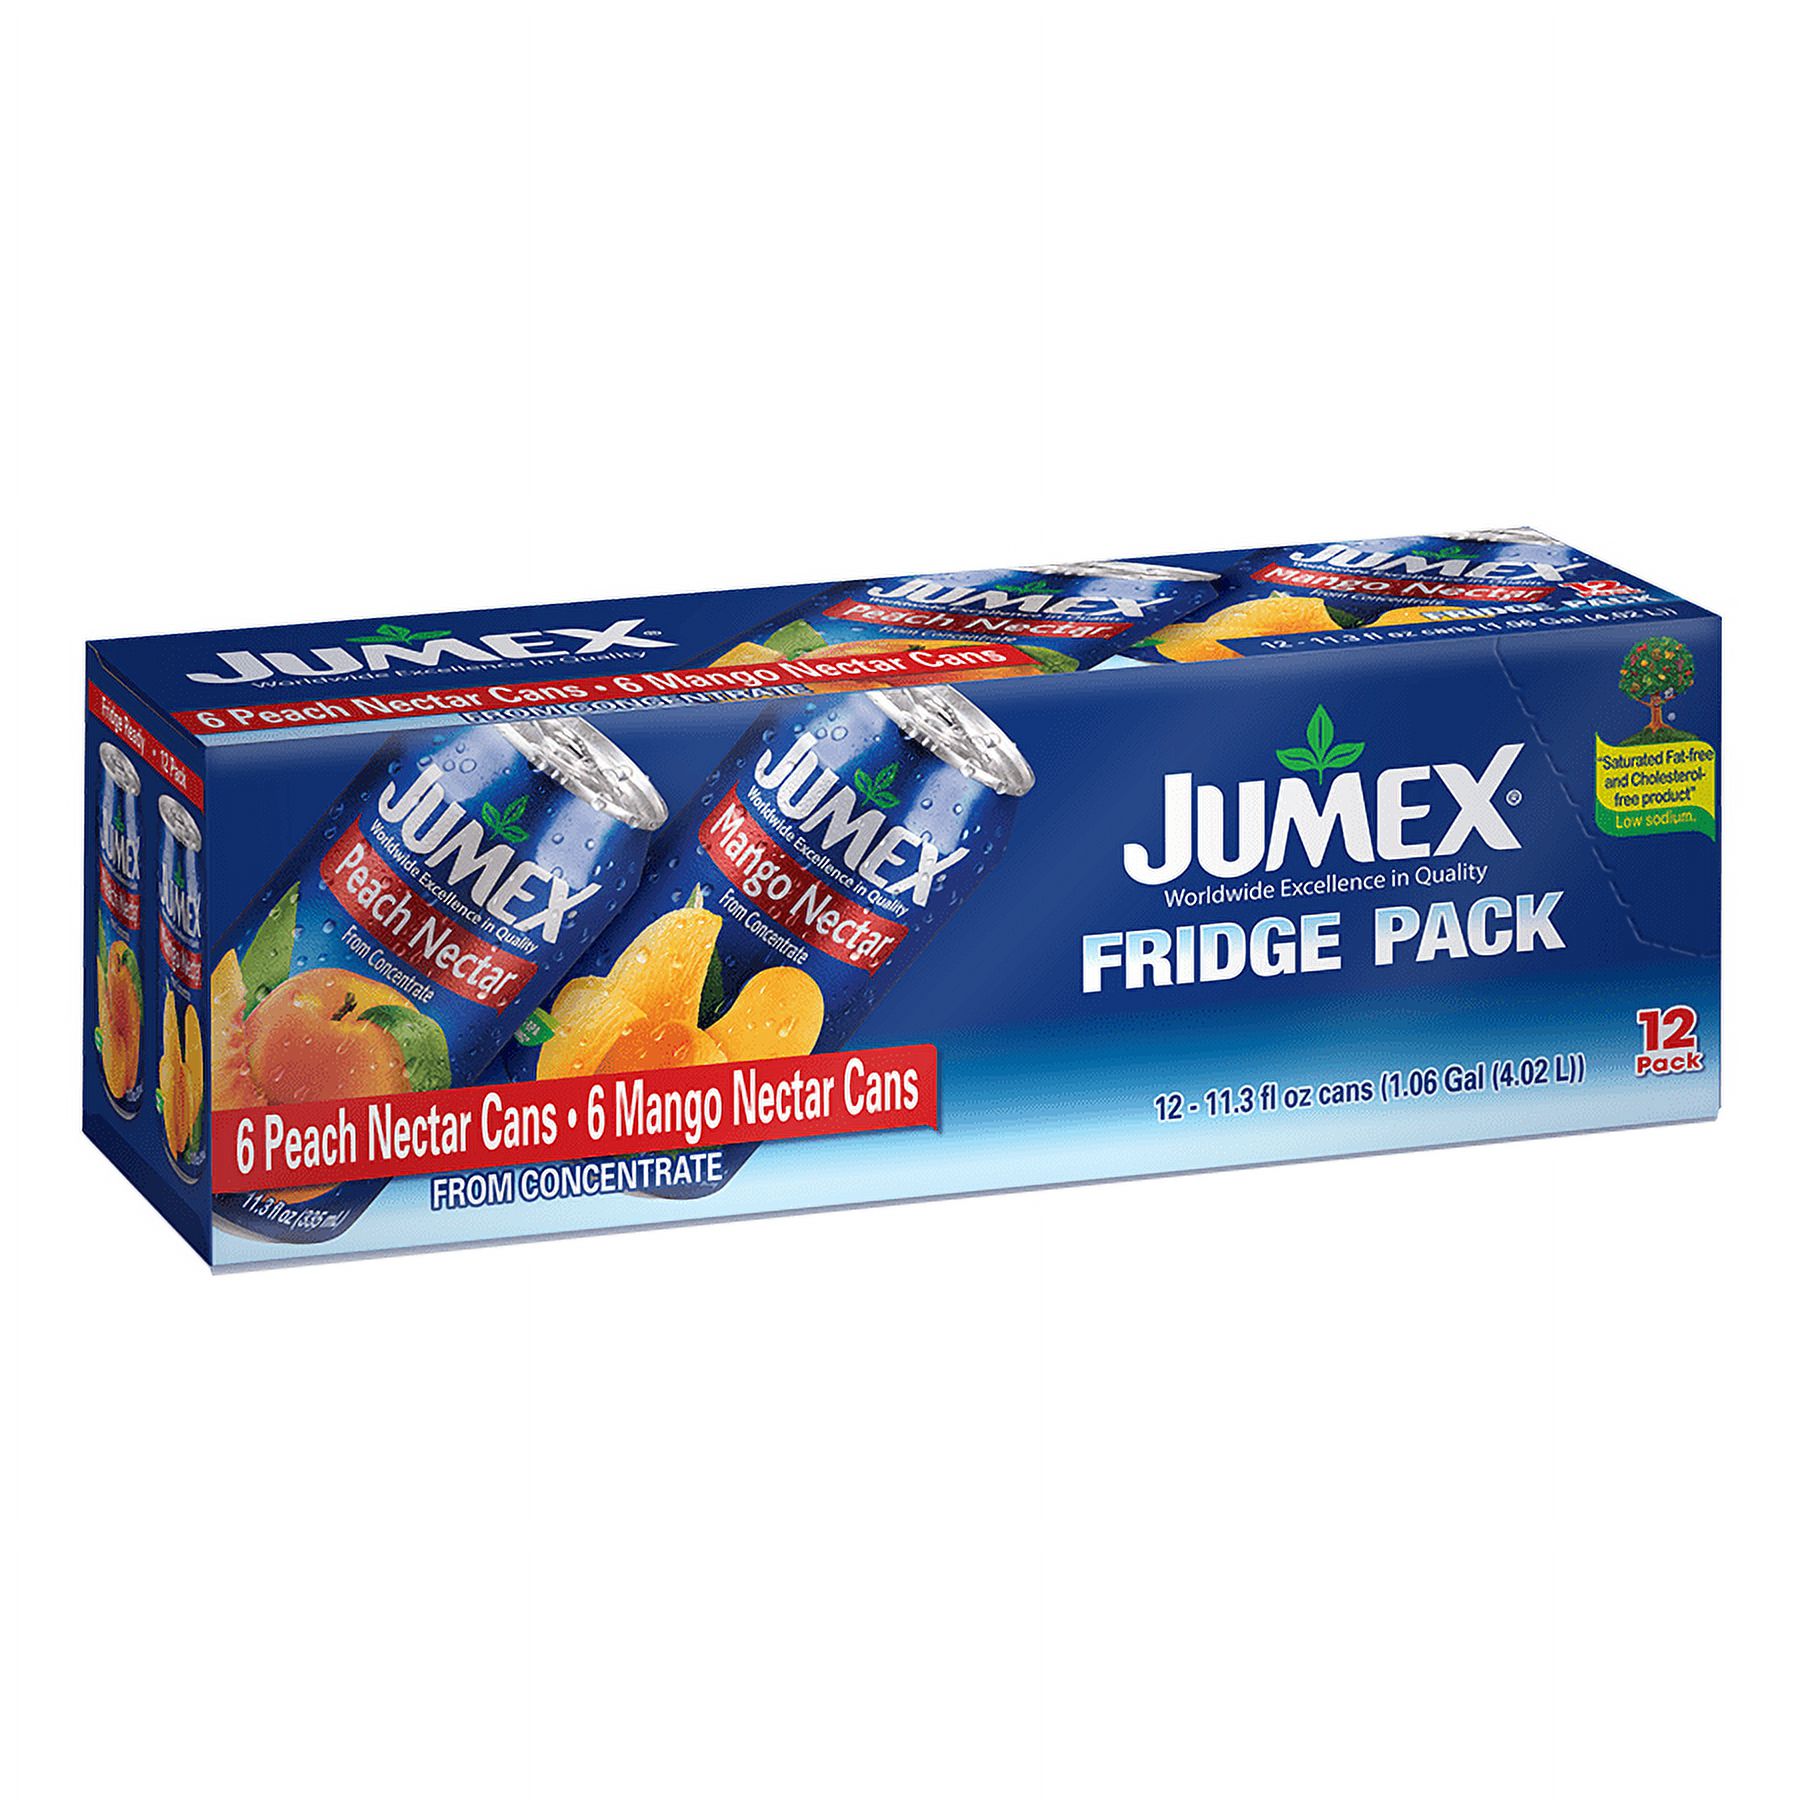 Jumex Mango and Peach Nectar from Concentrate, 11.3 Fl. Oz., 12 Count - image 2 of 5